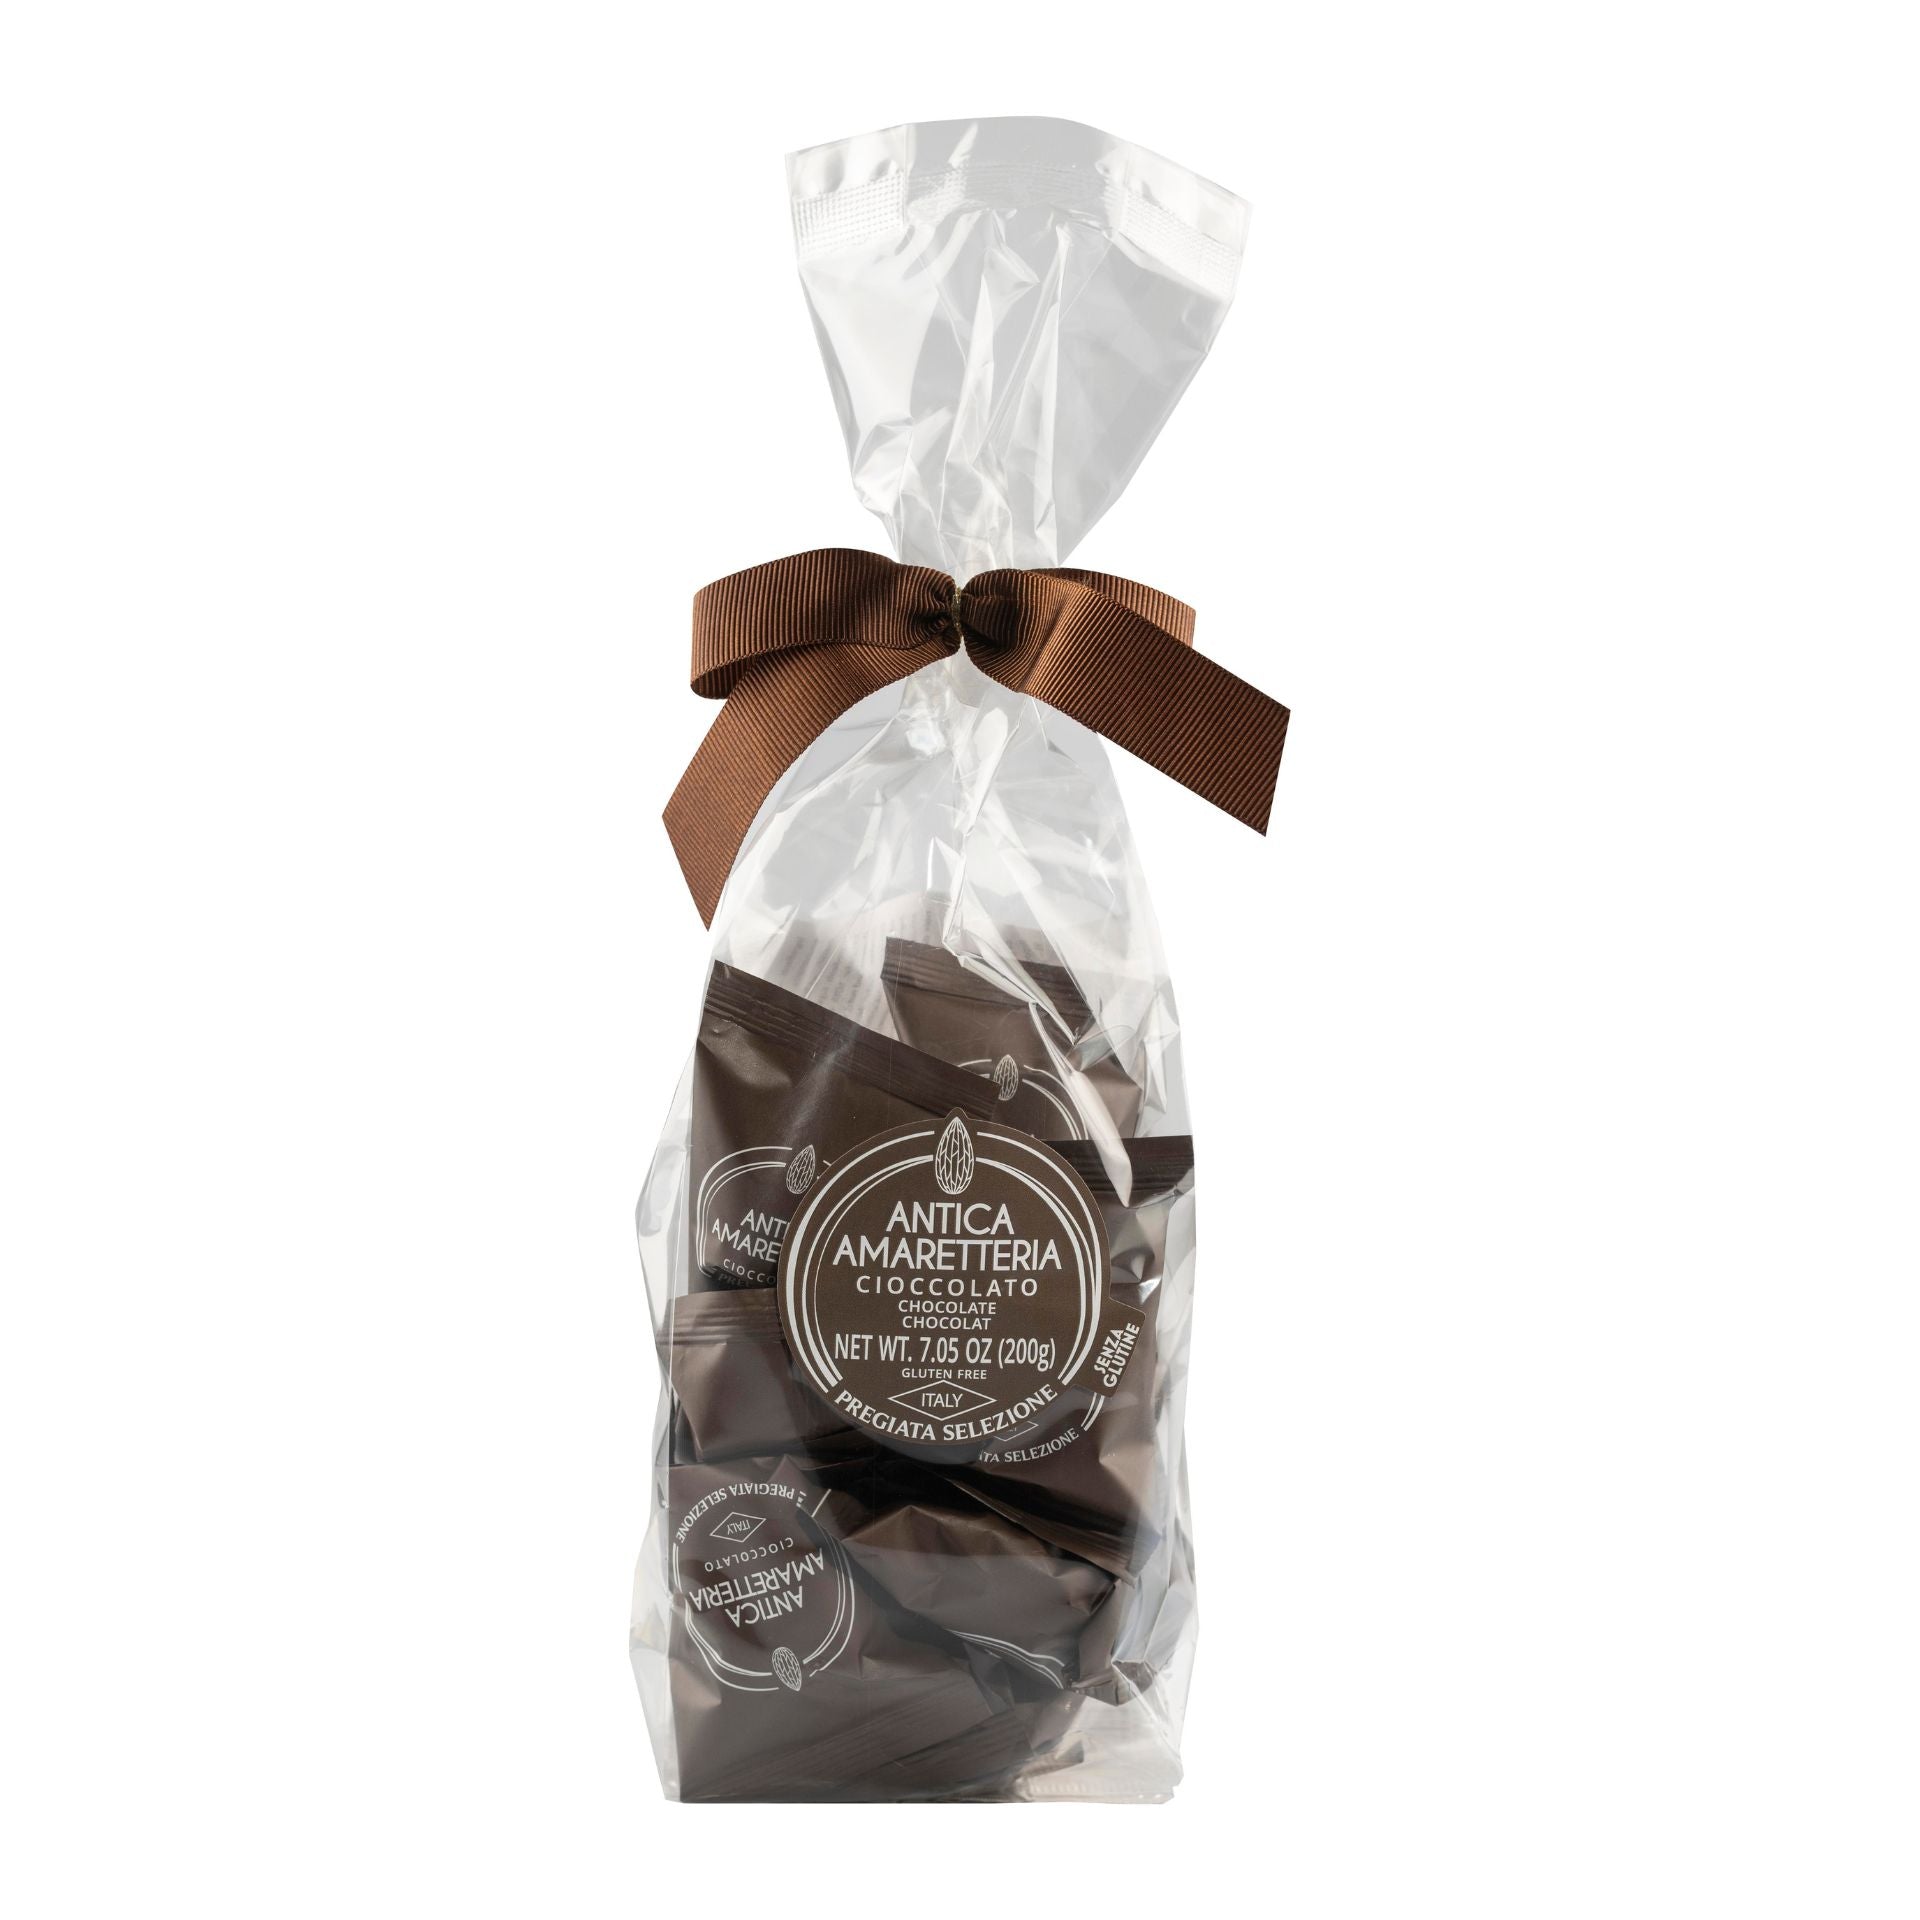 Antica Amaretteria Soft Chocolate Amaretti 200g (Bag)  | Imported and distributed in the UK by Just Gourmet Foods